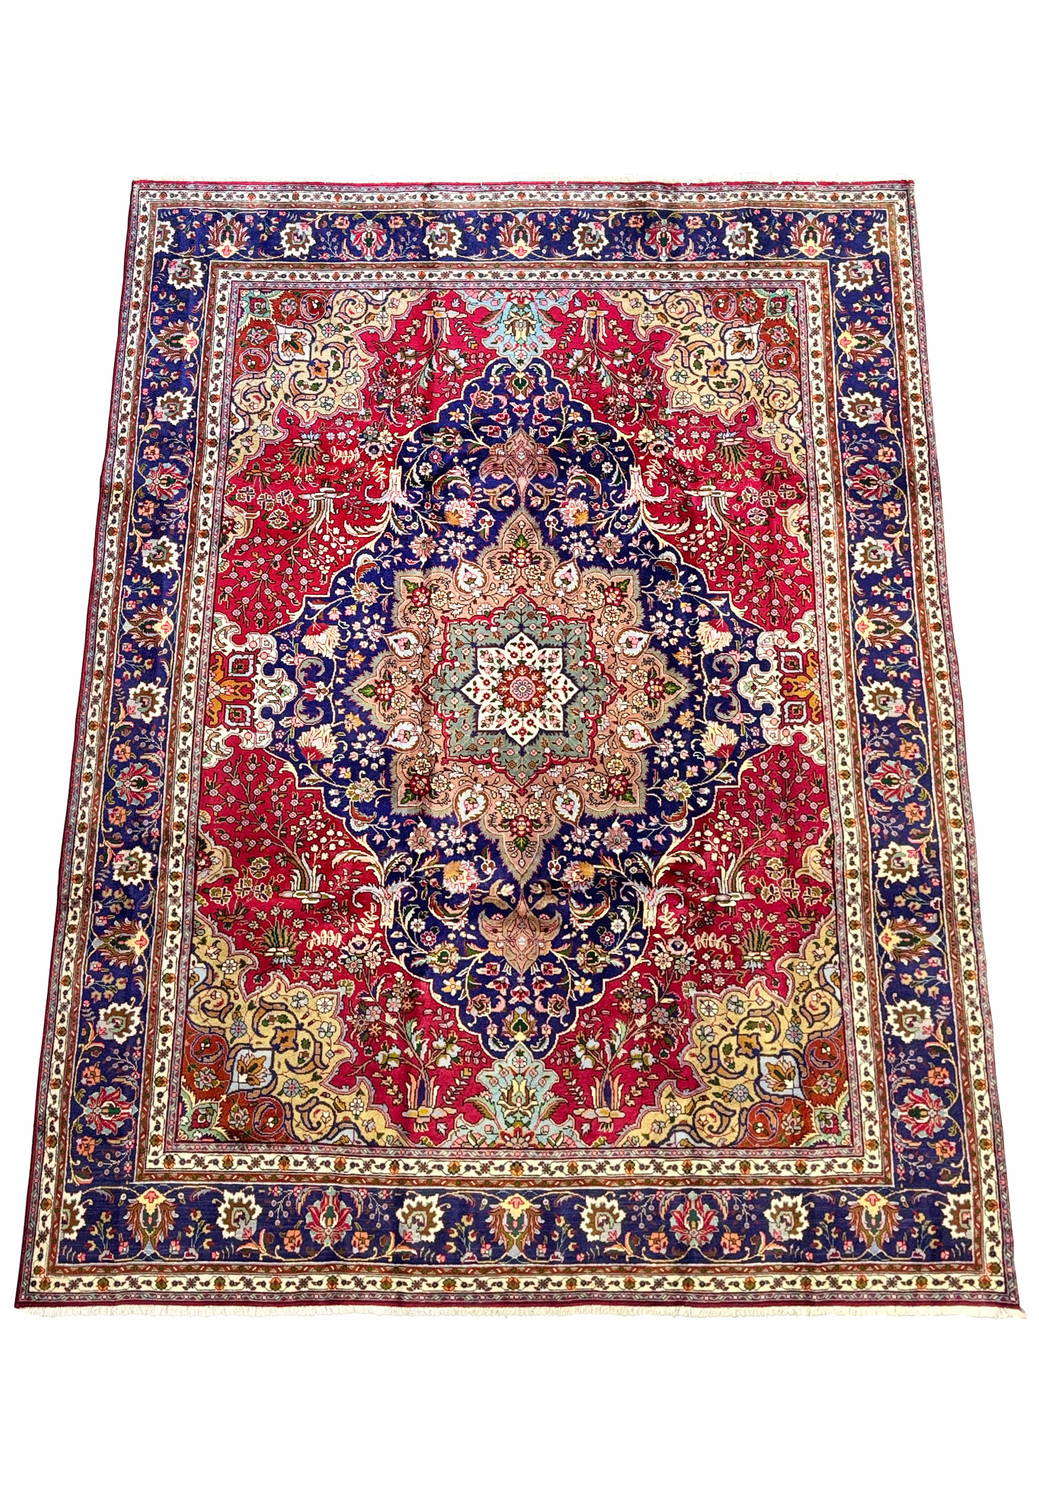 Overhead view of a 9'8" x 13'4" Persian Geometric Tabriz Rug showcasing a navy blue field with a central cream medallion surrounded by intricate floral patterns and a rich red perimeter.